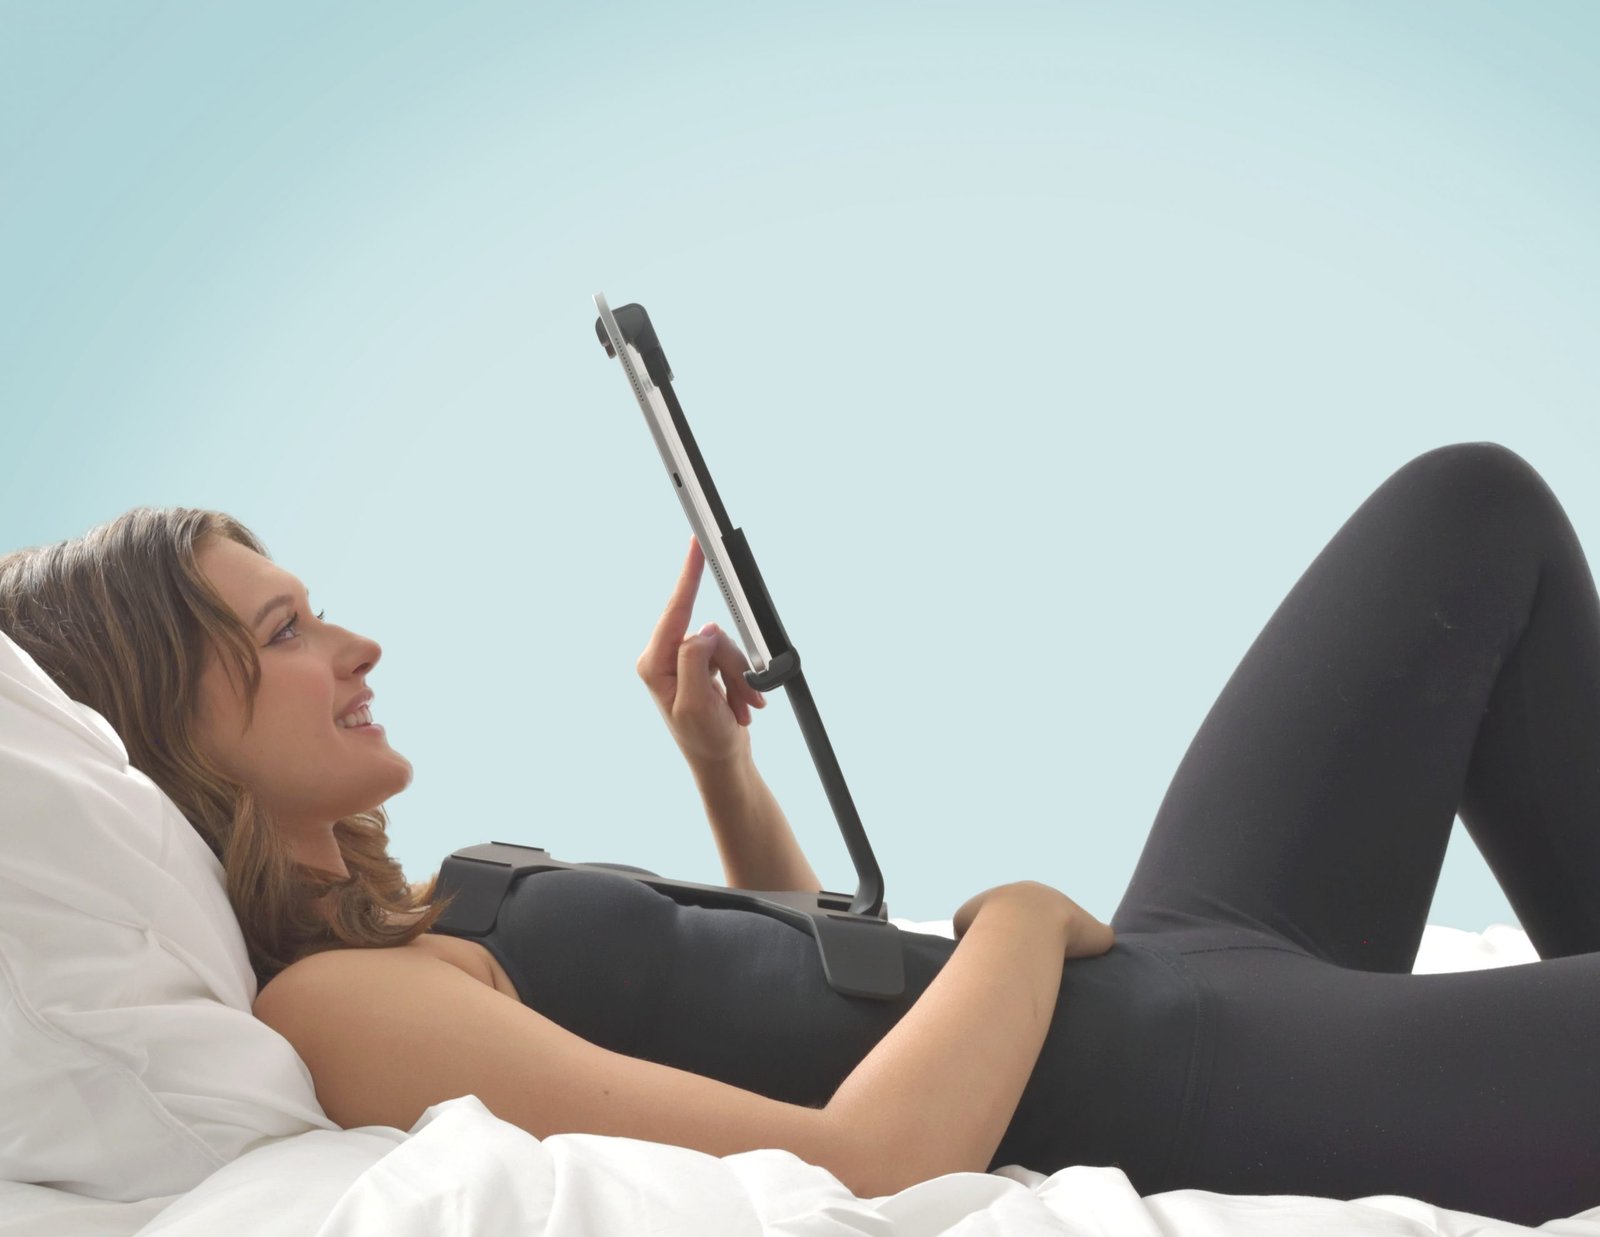 TSTAND 2 — the best iPad stand and holder for bed is back!